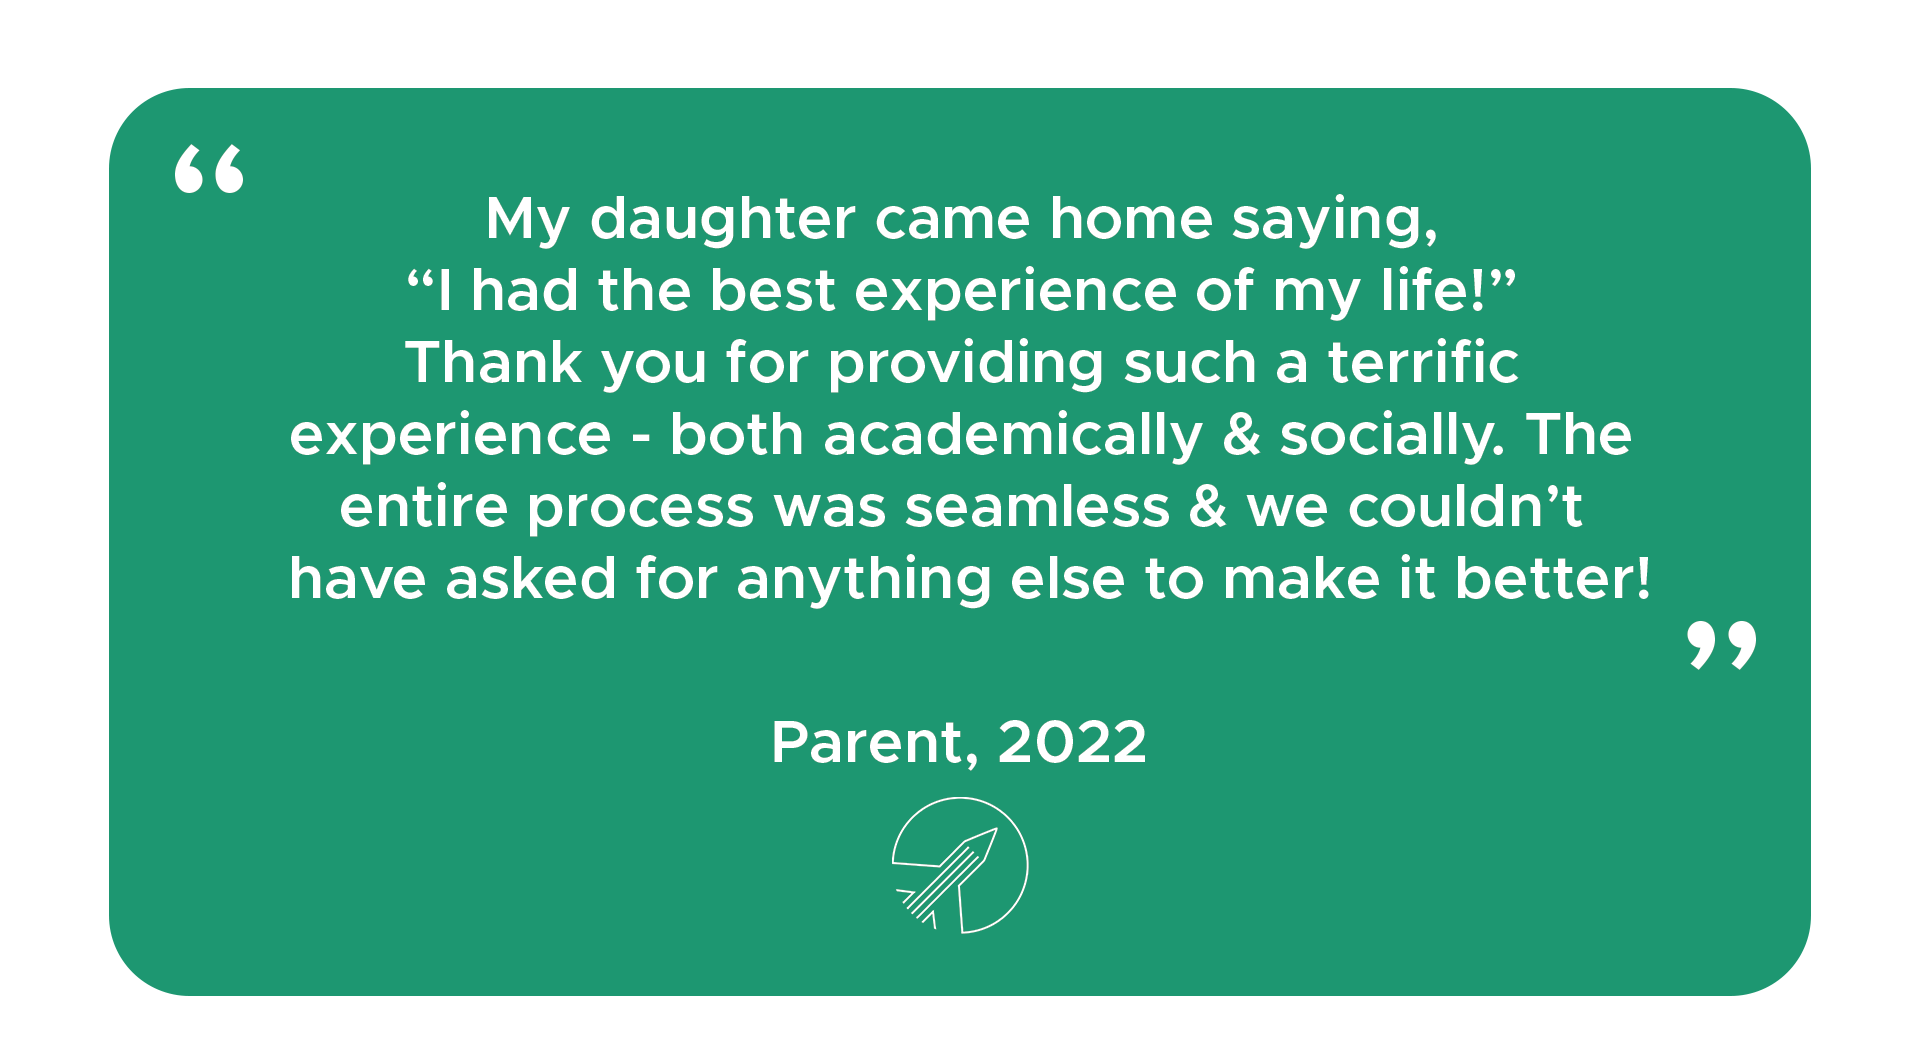 "My daughter came home saying, “I had the best experience of my life!” Thank you for providing such a terrific experience - both academically & socially. The entire process was seamless & we couldn’t have asked for anything else to make it better!" - Parent, 2022